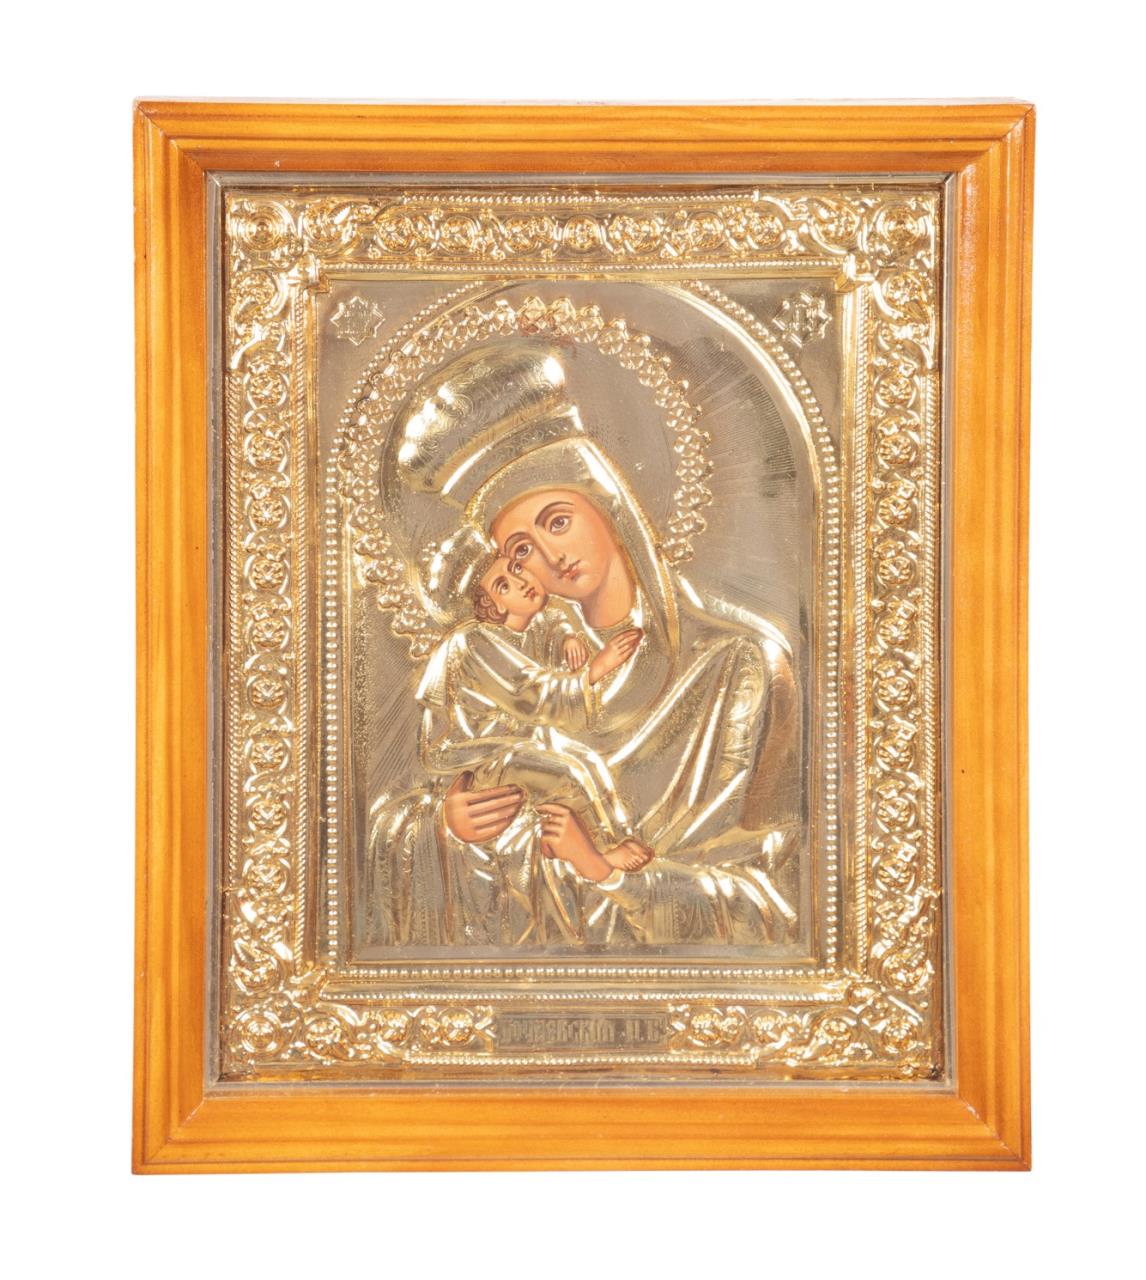 OUR LADY OF KYIV OR VLADIMIR ICON